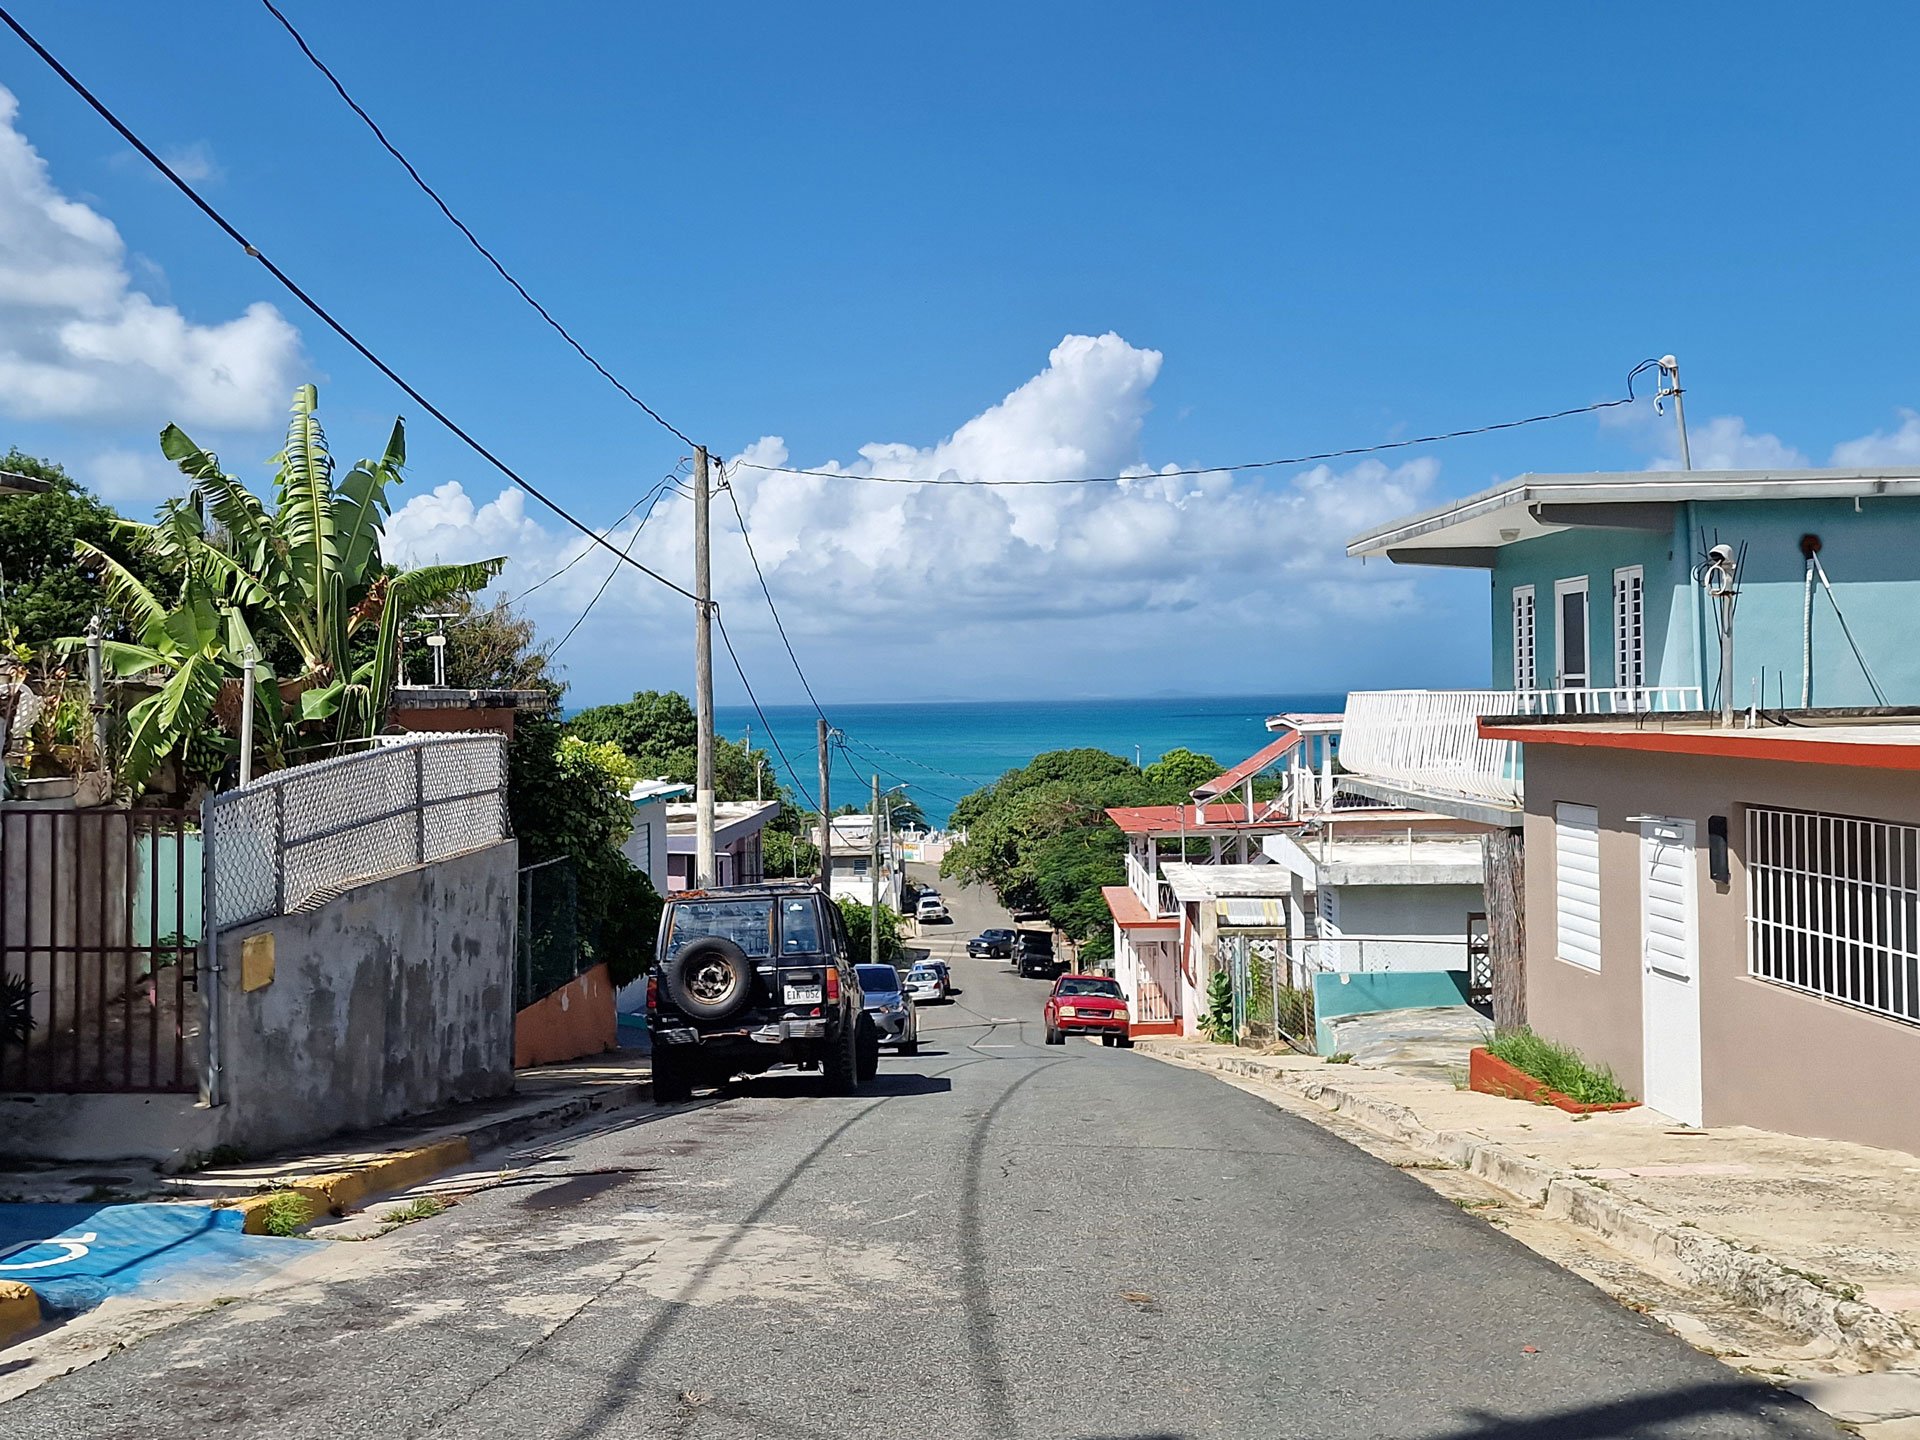 A view down the sunny street in Puerto Rico